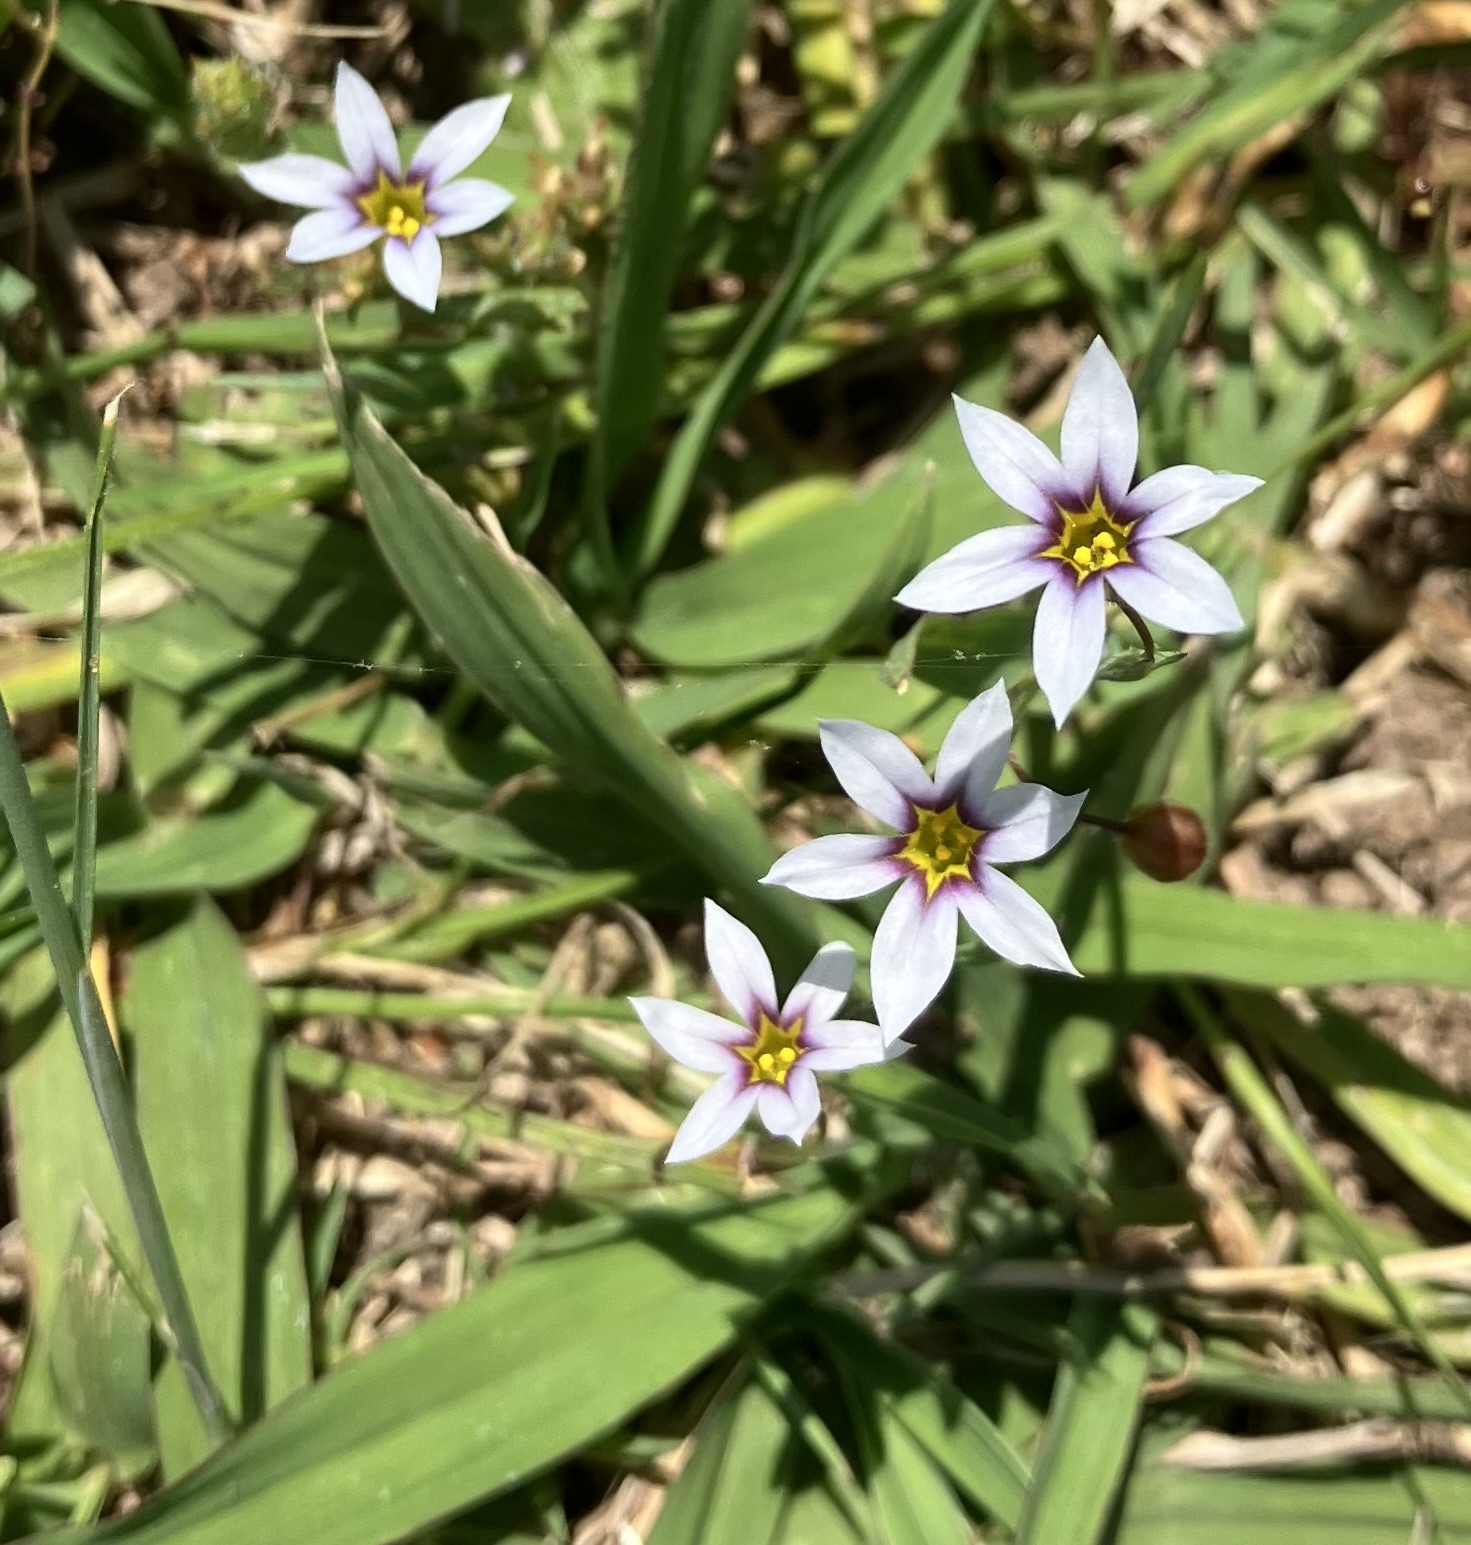 Tiny pale blue flowers with a purple and yellow starburst at the center